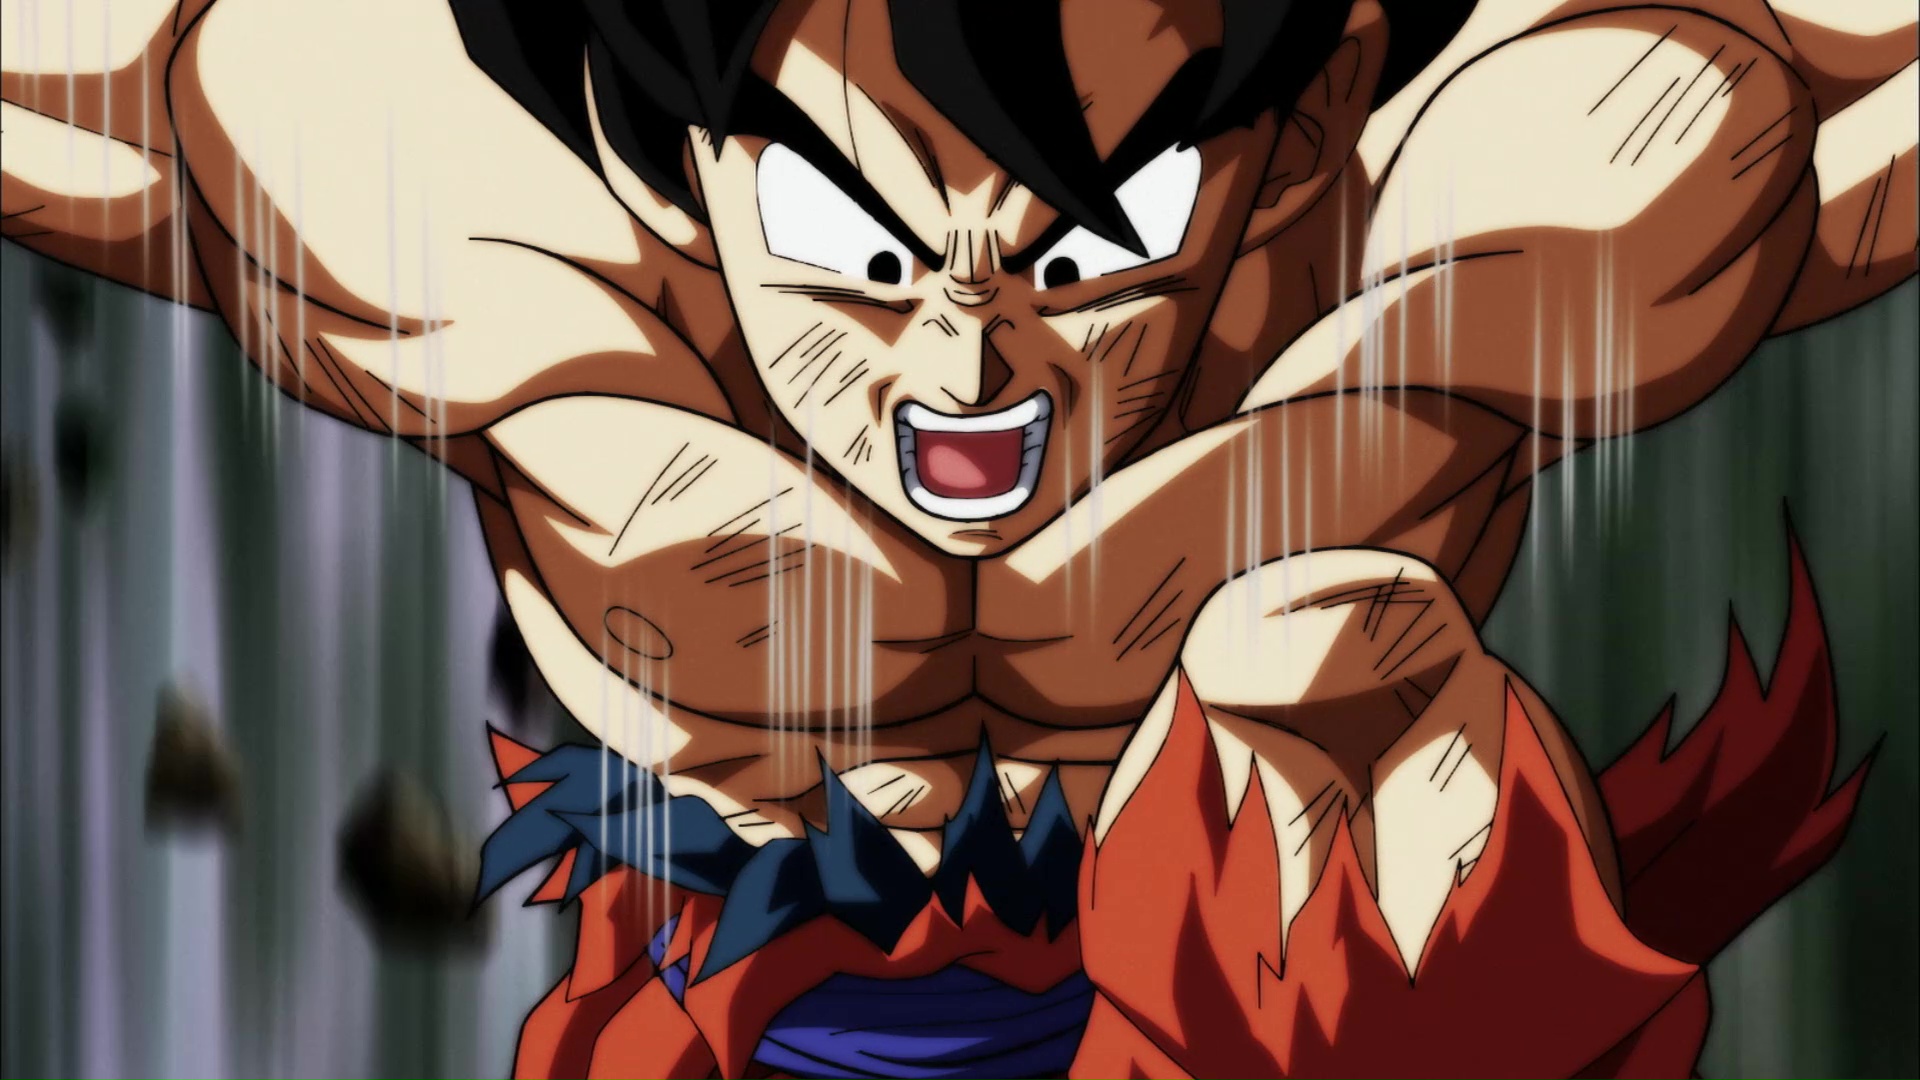 Don't pause it(also this subreddit has 131k members wIcH the dbs super  anime has 131 eps cool I guess) : r/Dragonballsuper